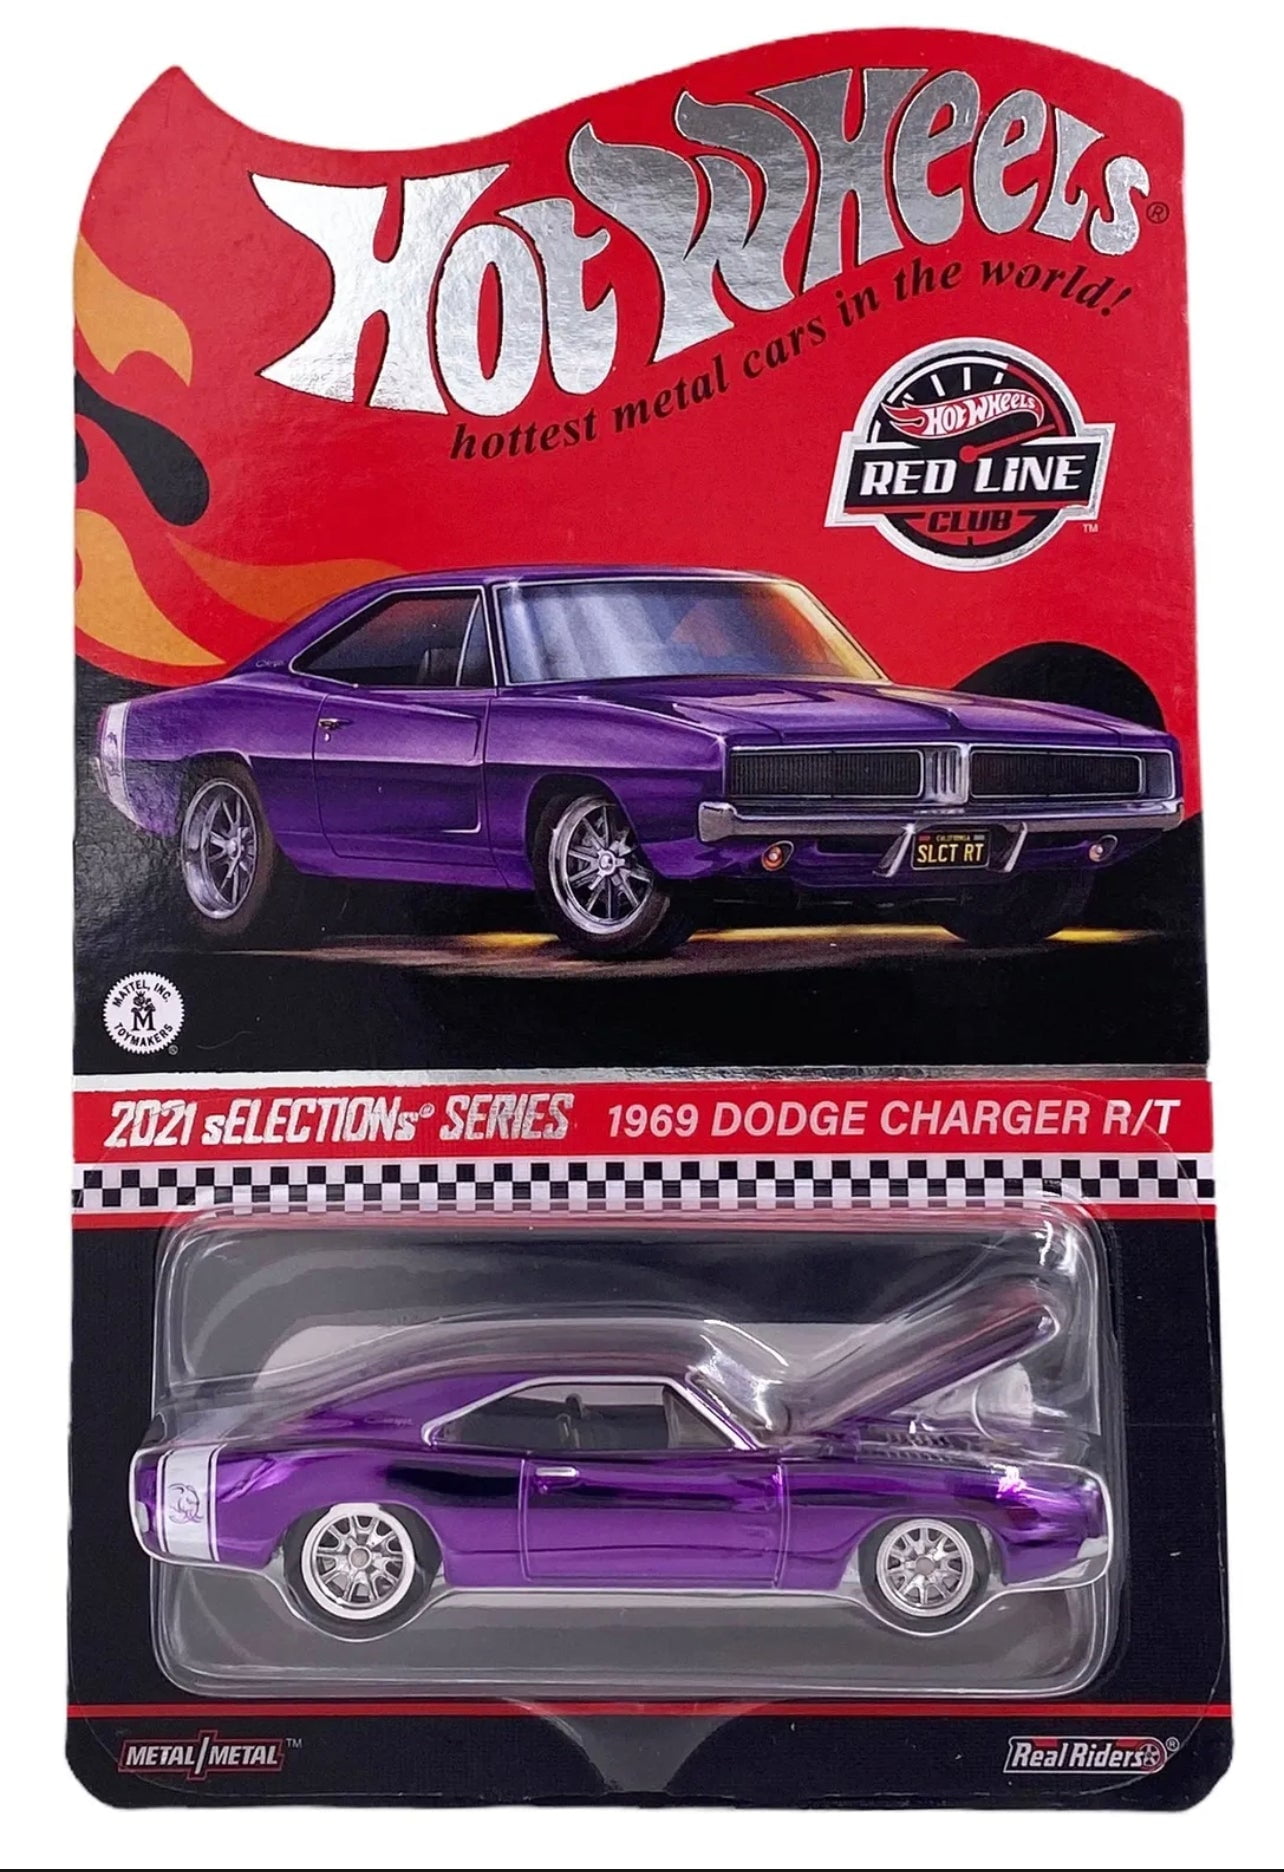 Hot Wheels RLC Red Line Club 2021 Selection 1969 Dodge Charger R/T Exclusive